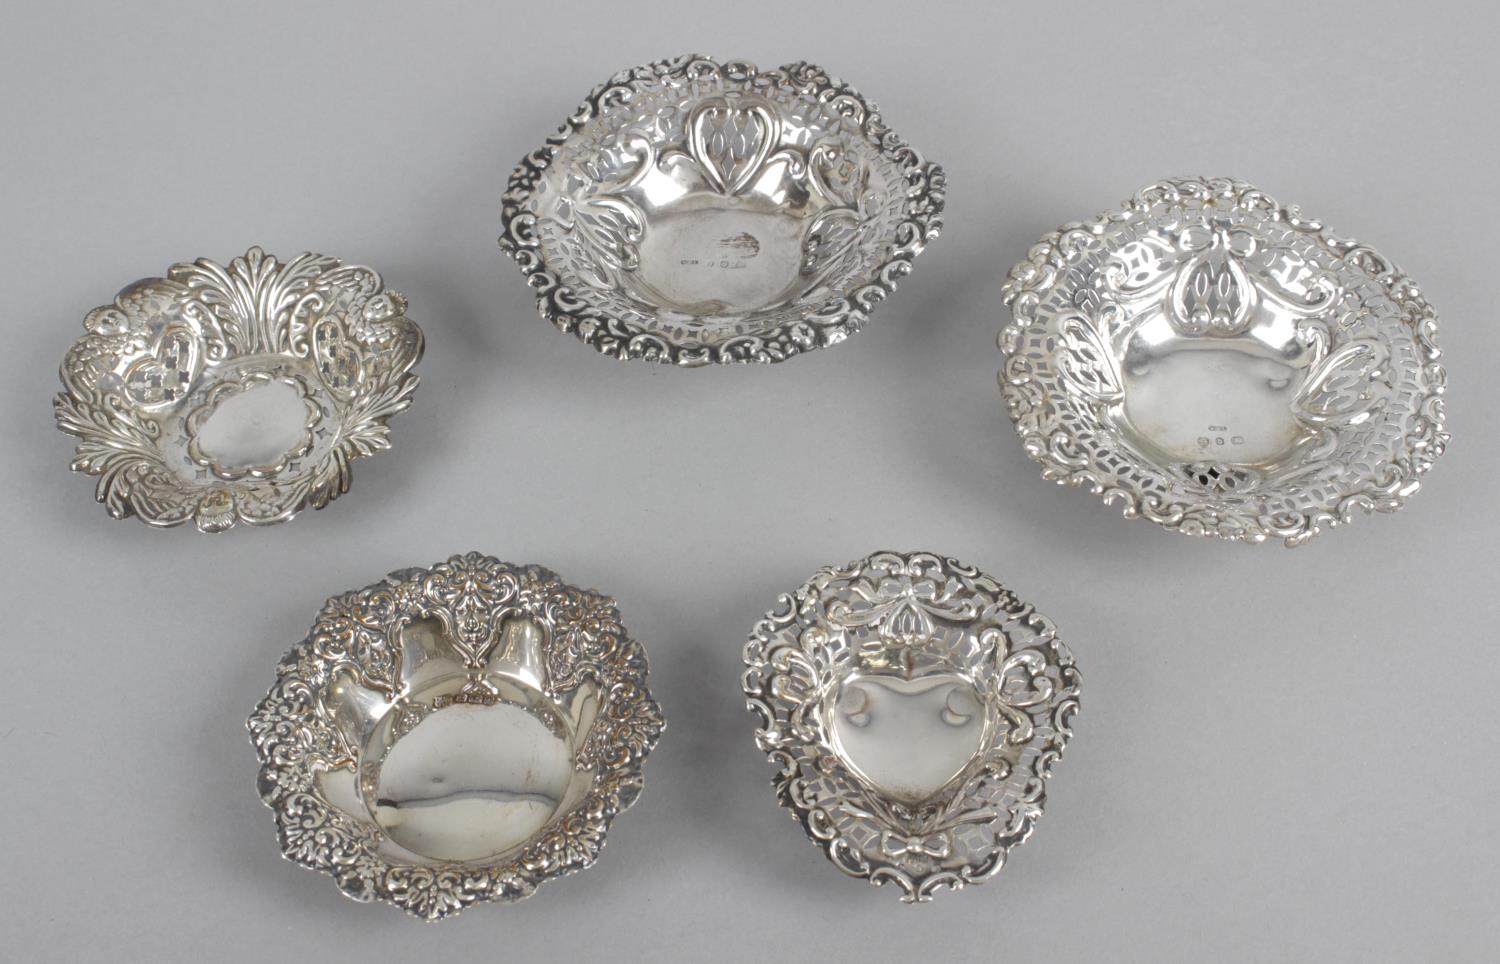 A selection of small pierced or embossed silver dishes, - Image 3 of 4